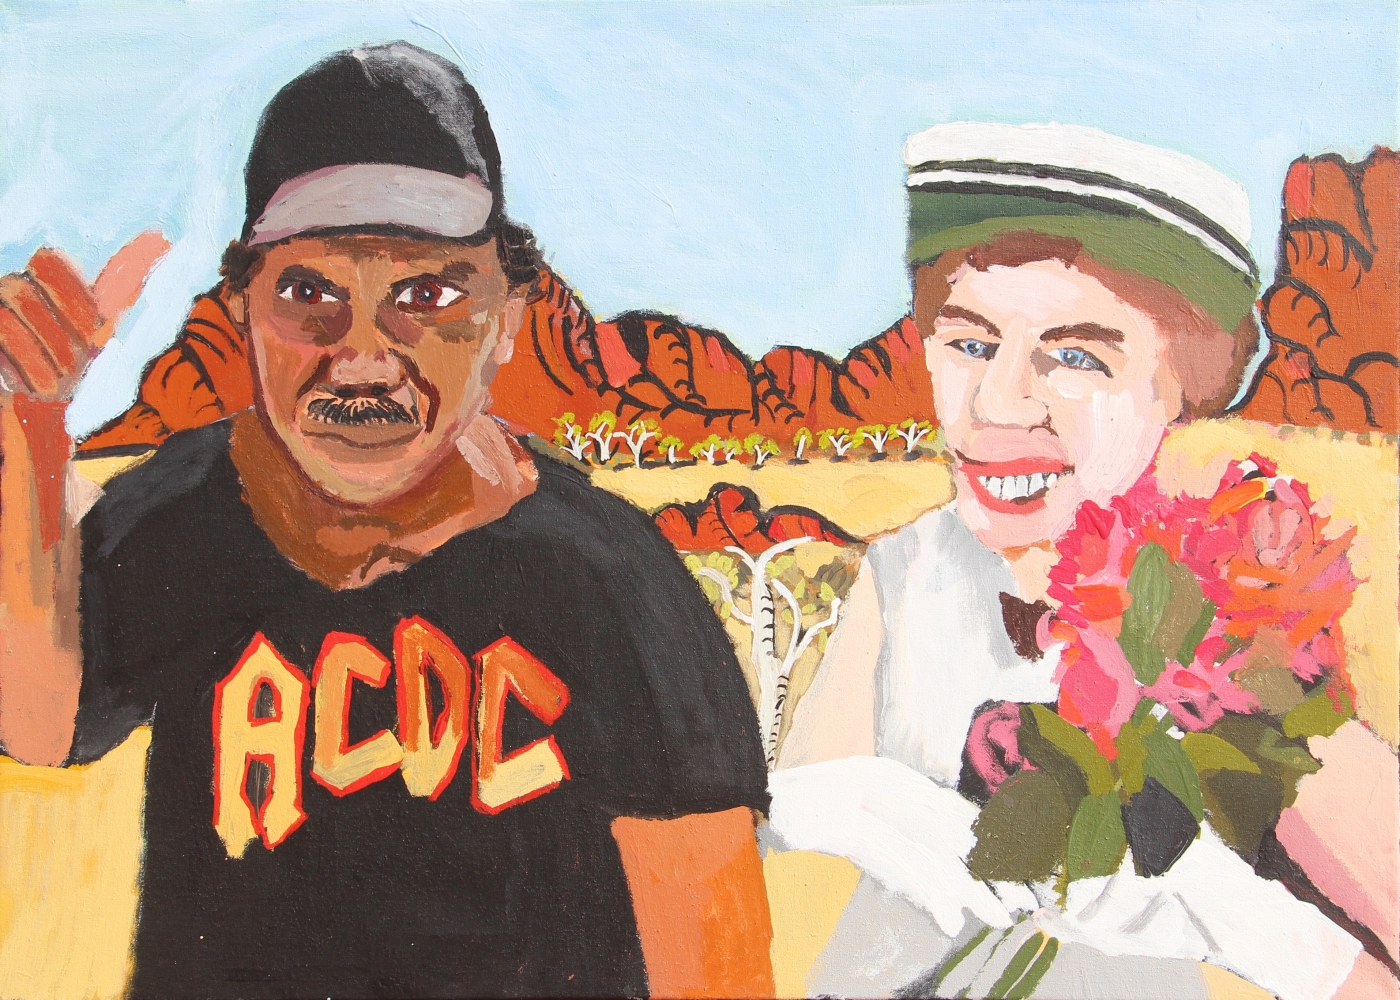 Vincent Namatjira

The Royal Tour (Vincent and Elizabeth 3), 2021

Acrylic on Linen
26.5 x 36 in.